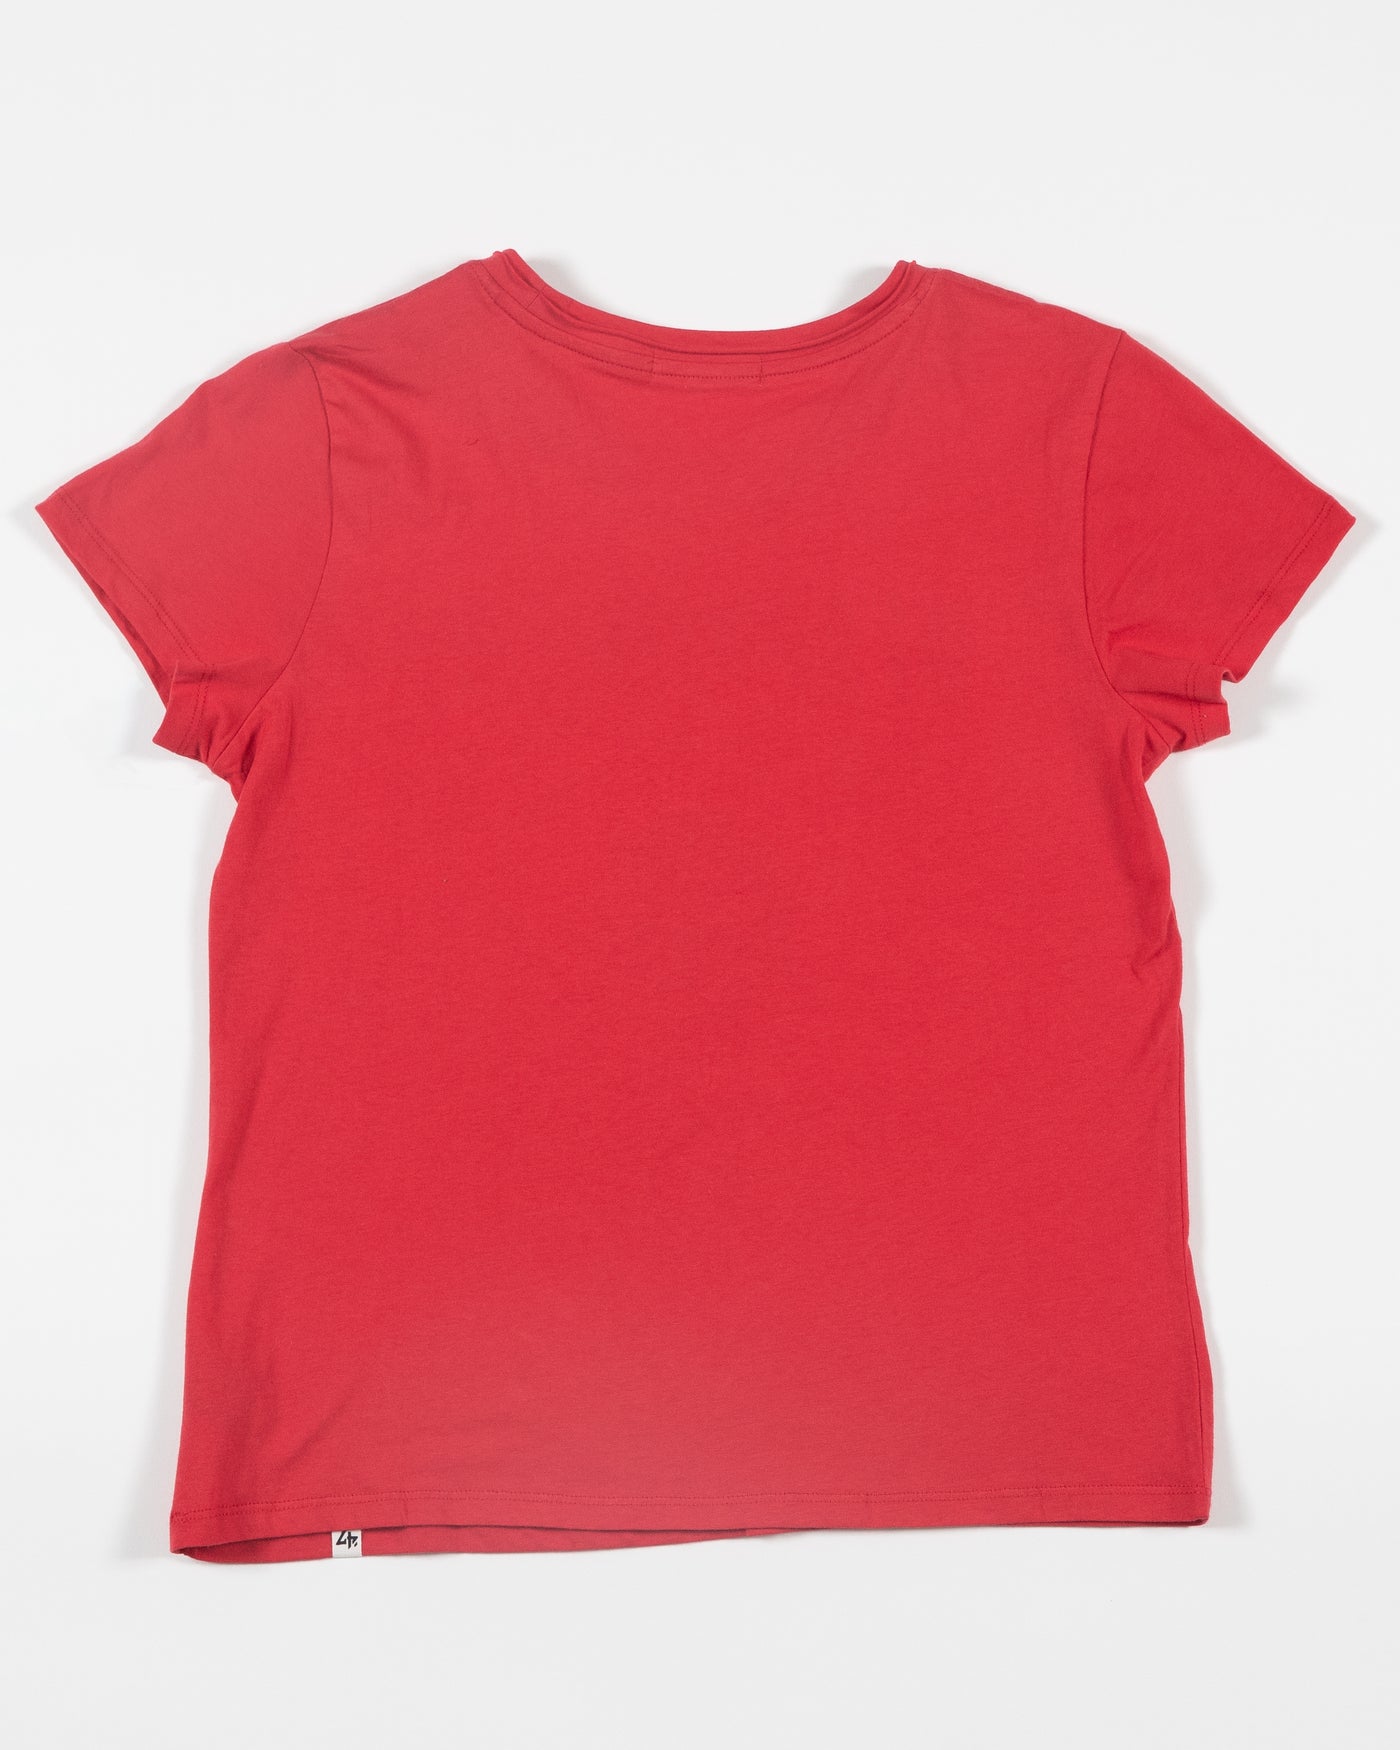 red '47 brand women's tee with Chicago Blackhawks primary logo and word mark on front - back lay flat